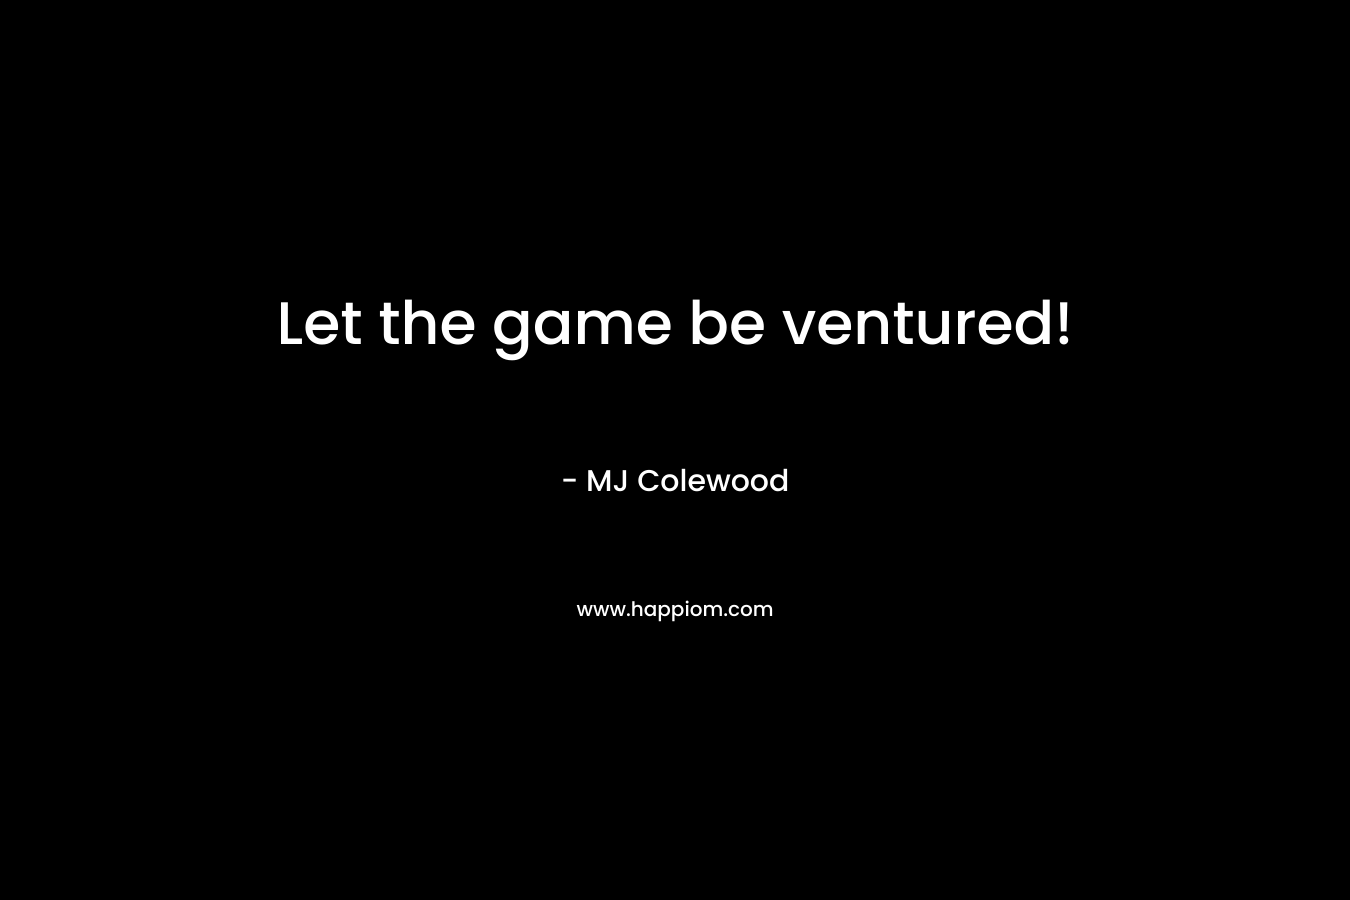 Let the game be ventured!